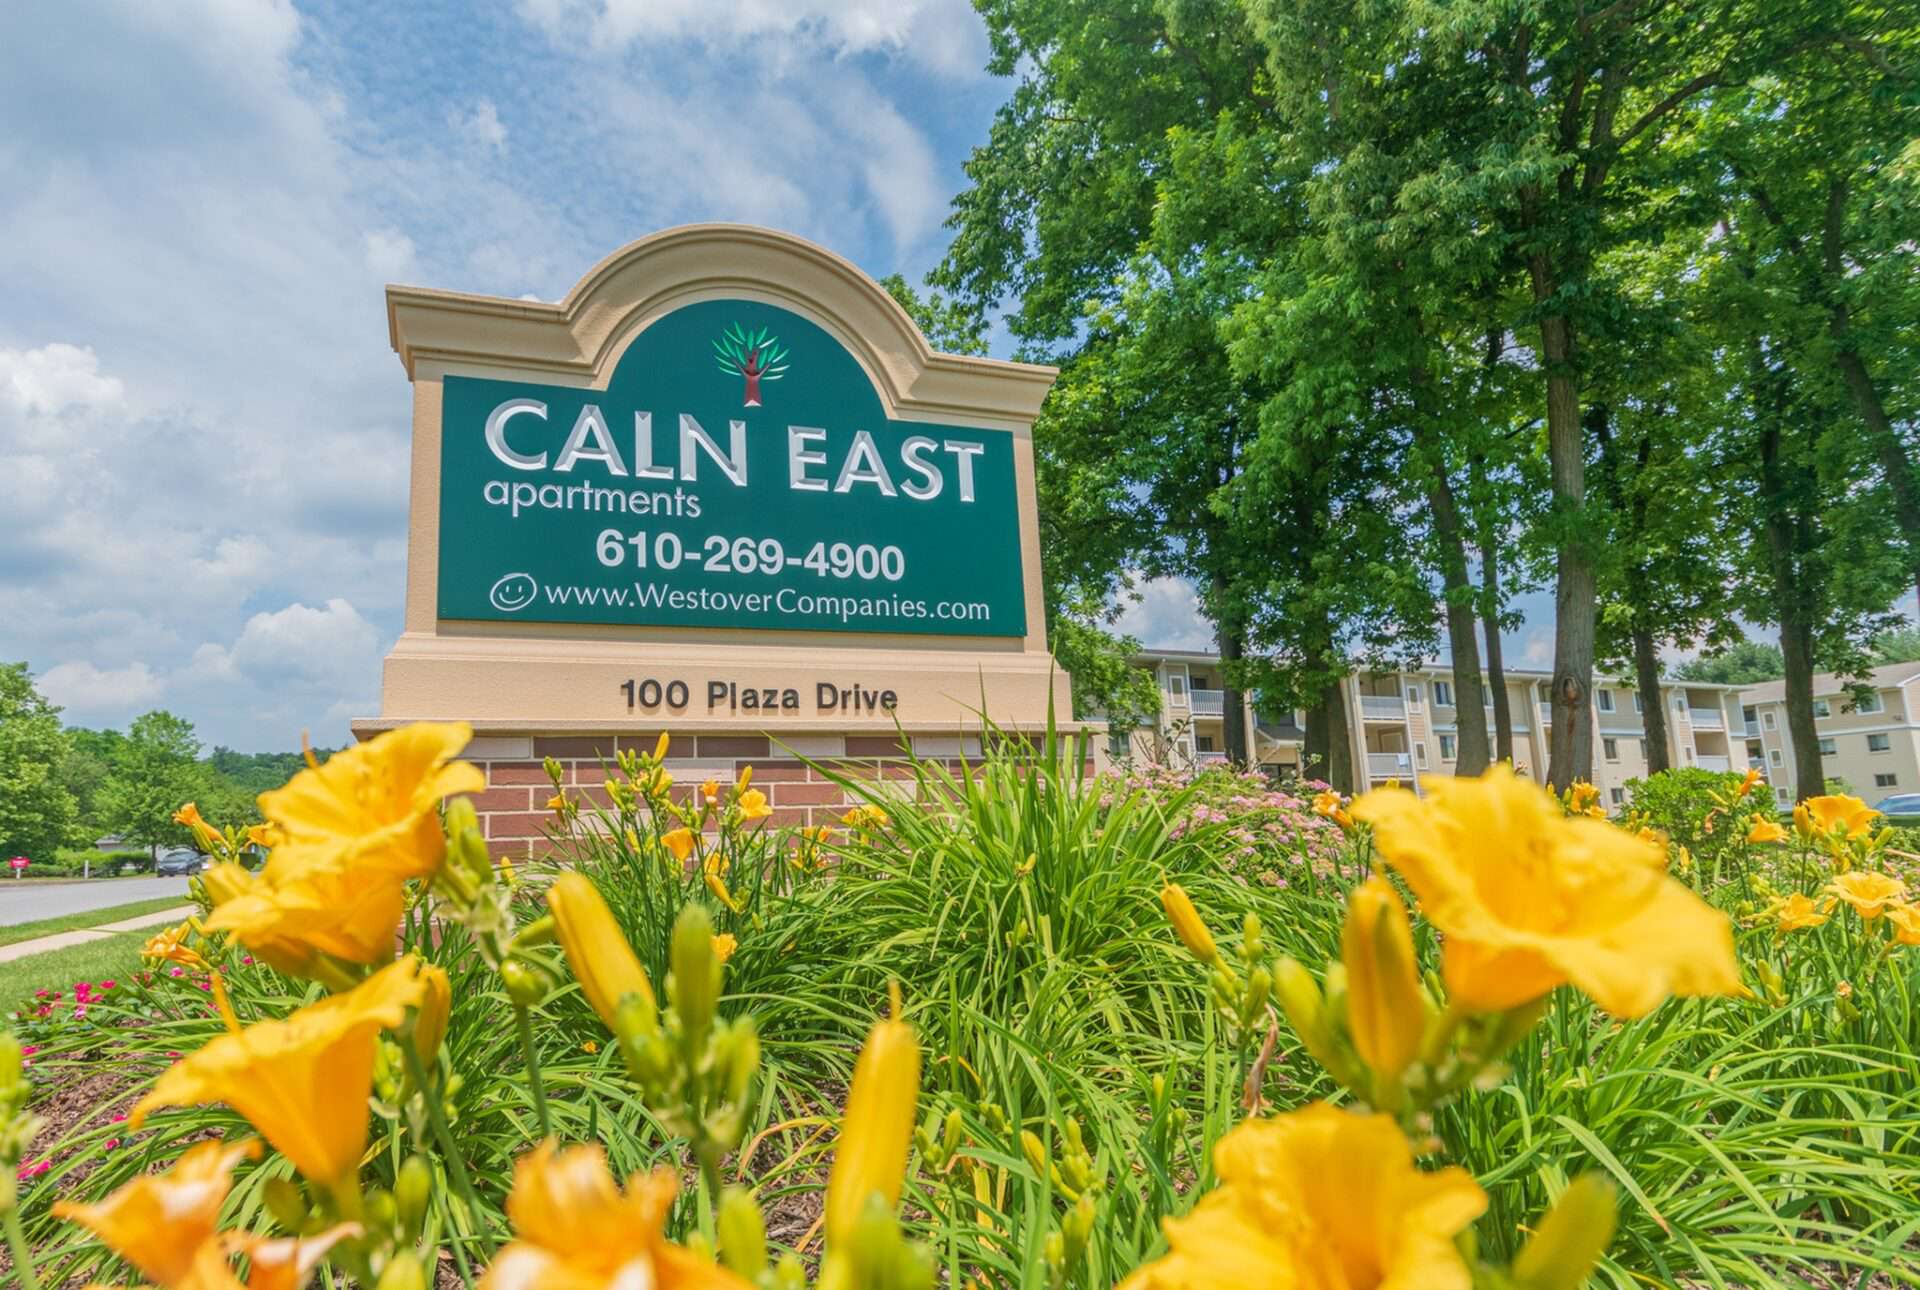 Caln East apartments welcome sign, fitted in a beautiful garden